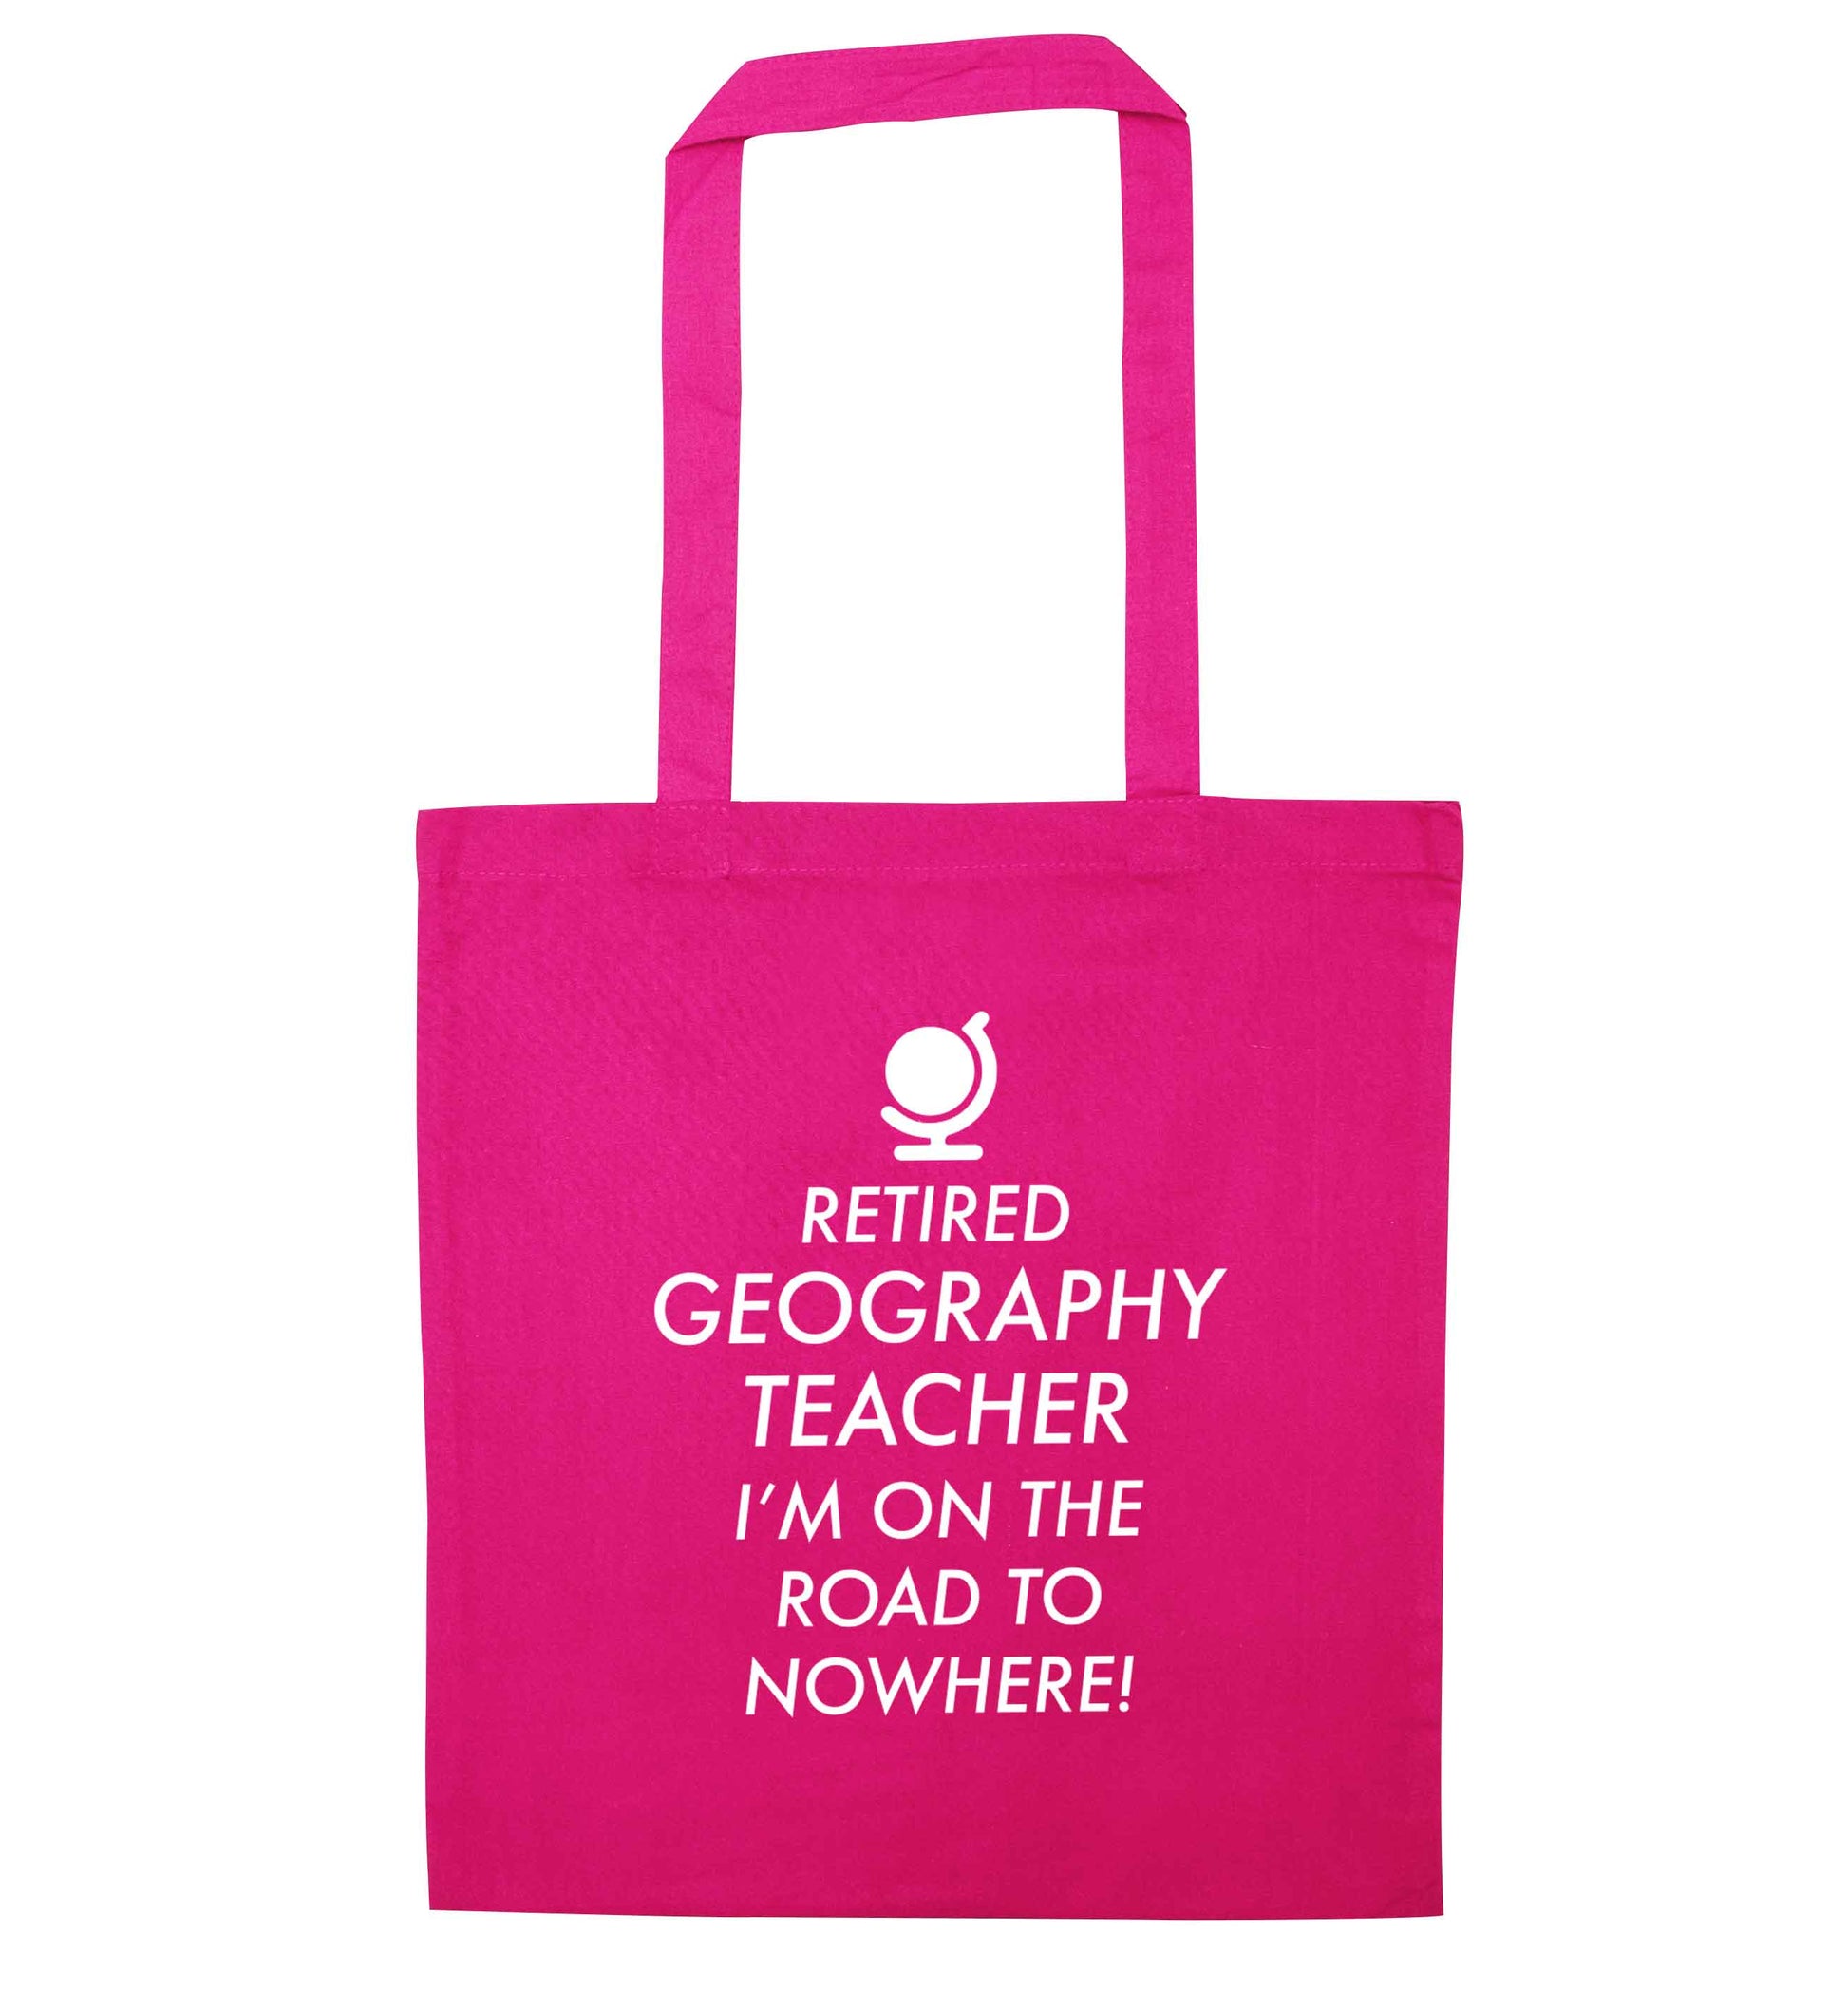 Retired geography teacher I'm on the road to nowhere pink tote bag